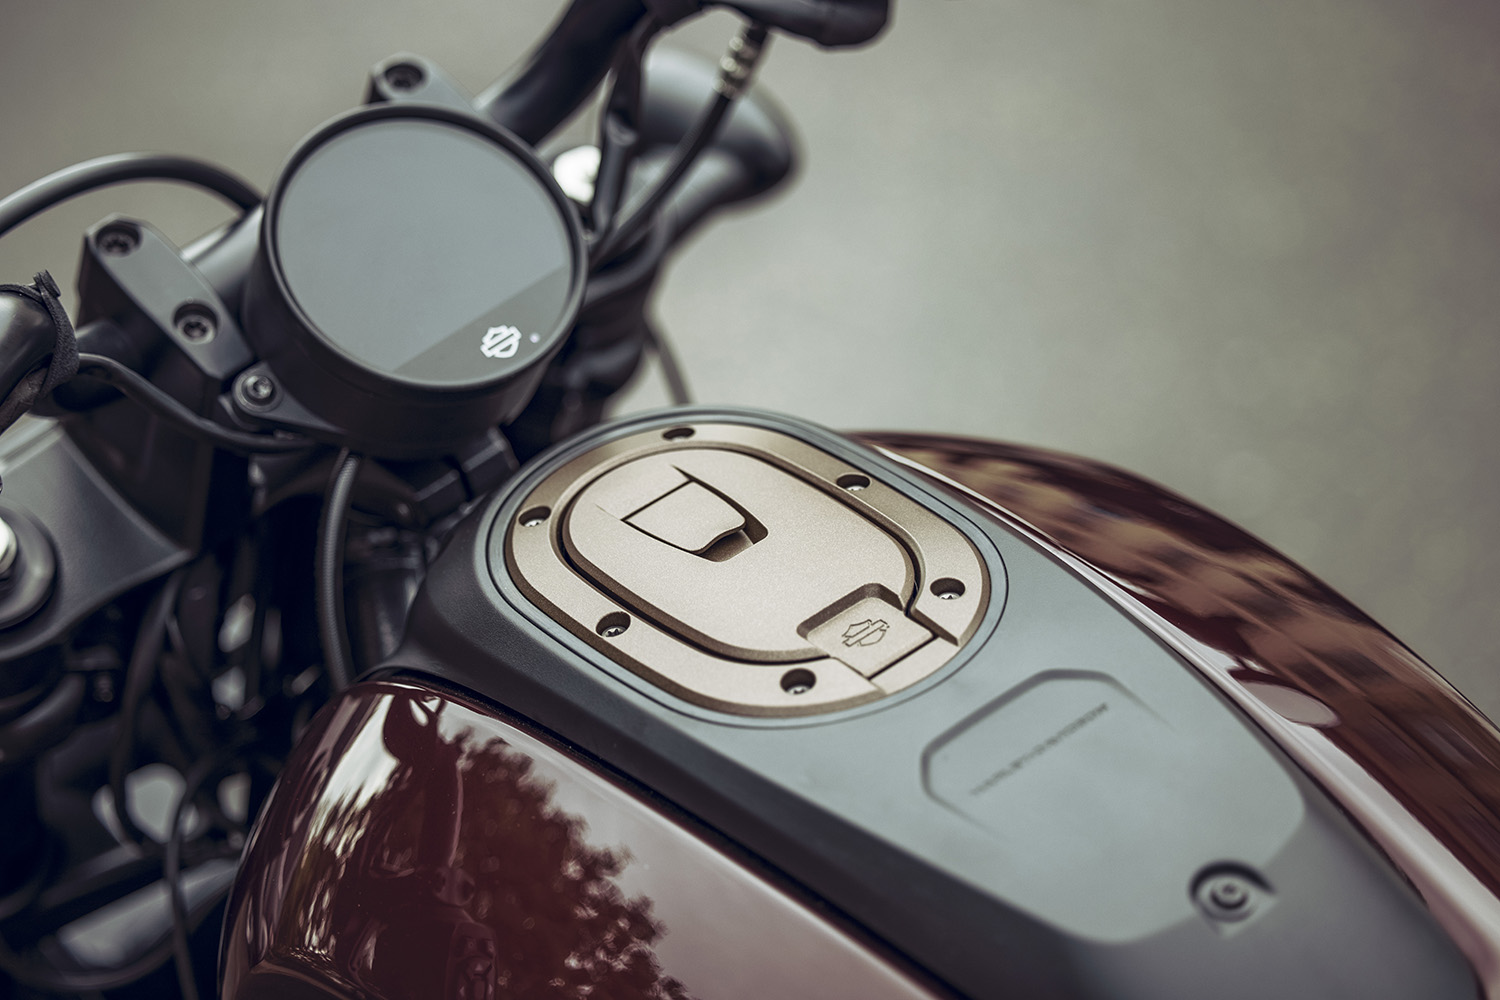 2021 Harley-Davidson Sportster S Review (14 Fast Facts)